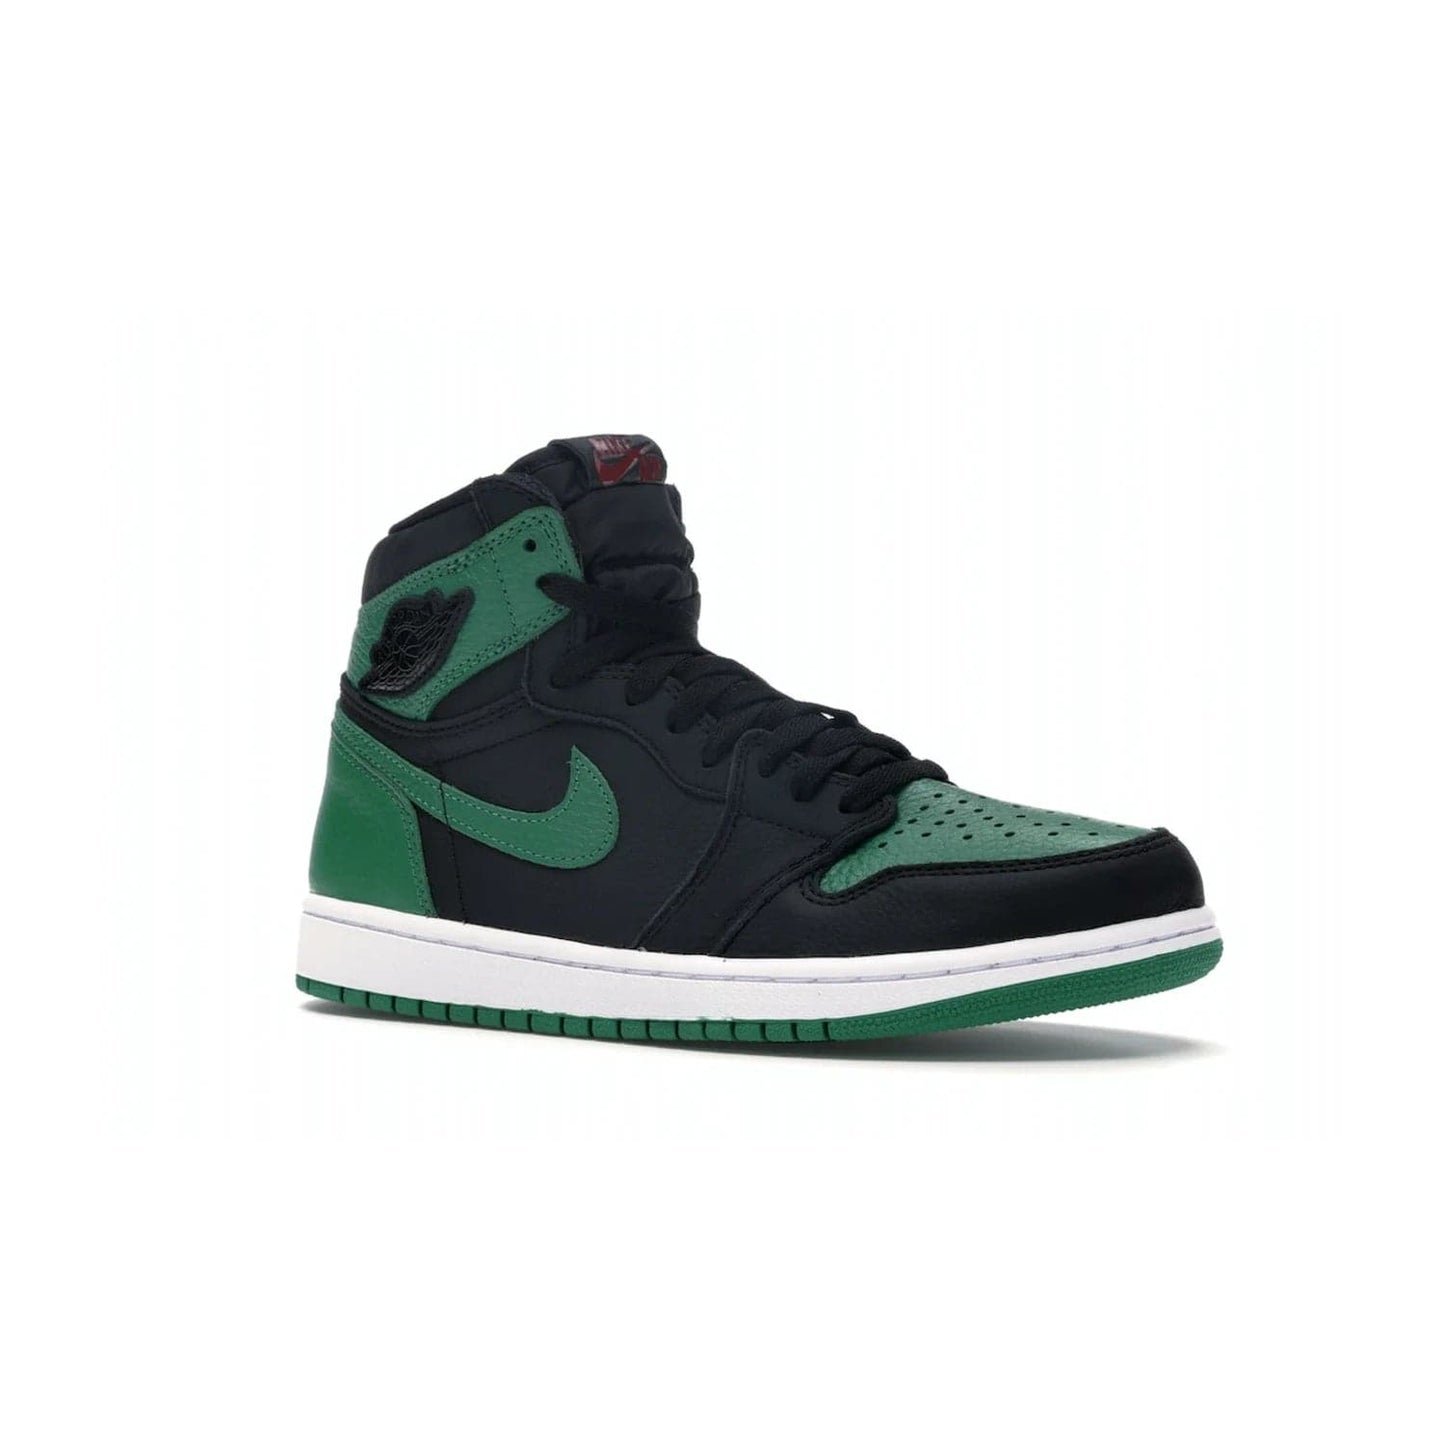 Jordan 1 Retro High Pine Green Black - Image 4 - Only at www.BallersClubKickz.com - Step into fresh style with the Jordan 1 Retro High Pine Green Black. Combining a black tumbled leather upper with green leather overlays, this sneaker features a Gym Red embroidered tongue tag, sail midsole, and pine green outsole for iconic style with a unique twist.